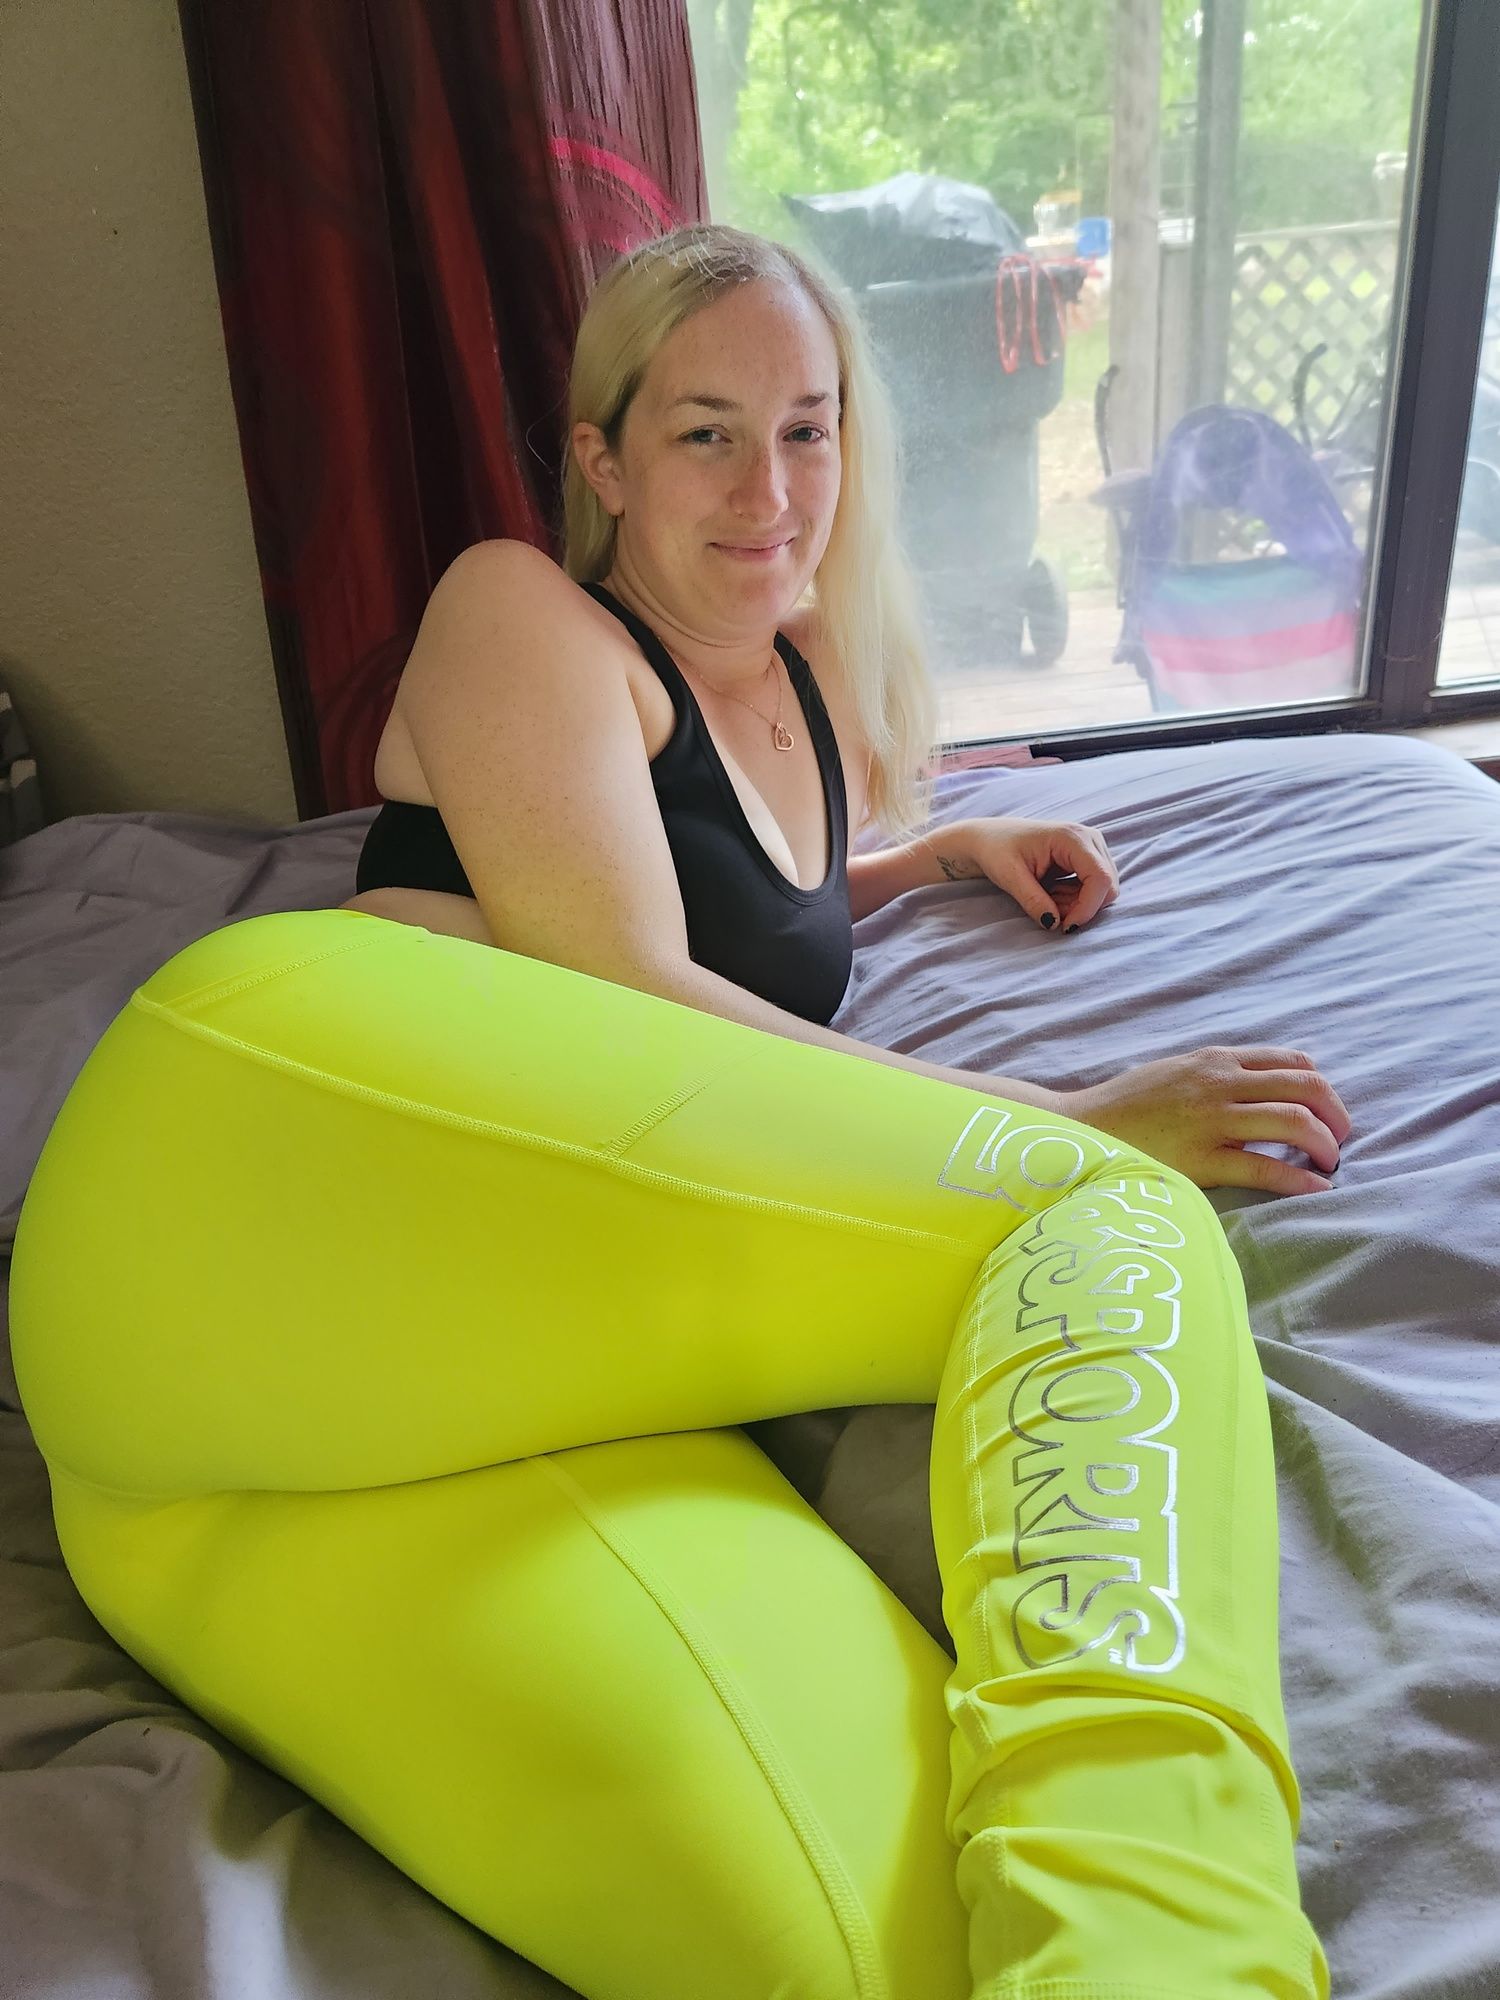 (Videos on profile) Yellow leggings and tits - Mama_Foxx94 #6